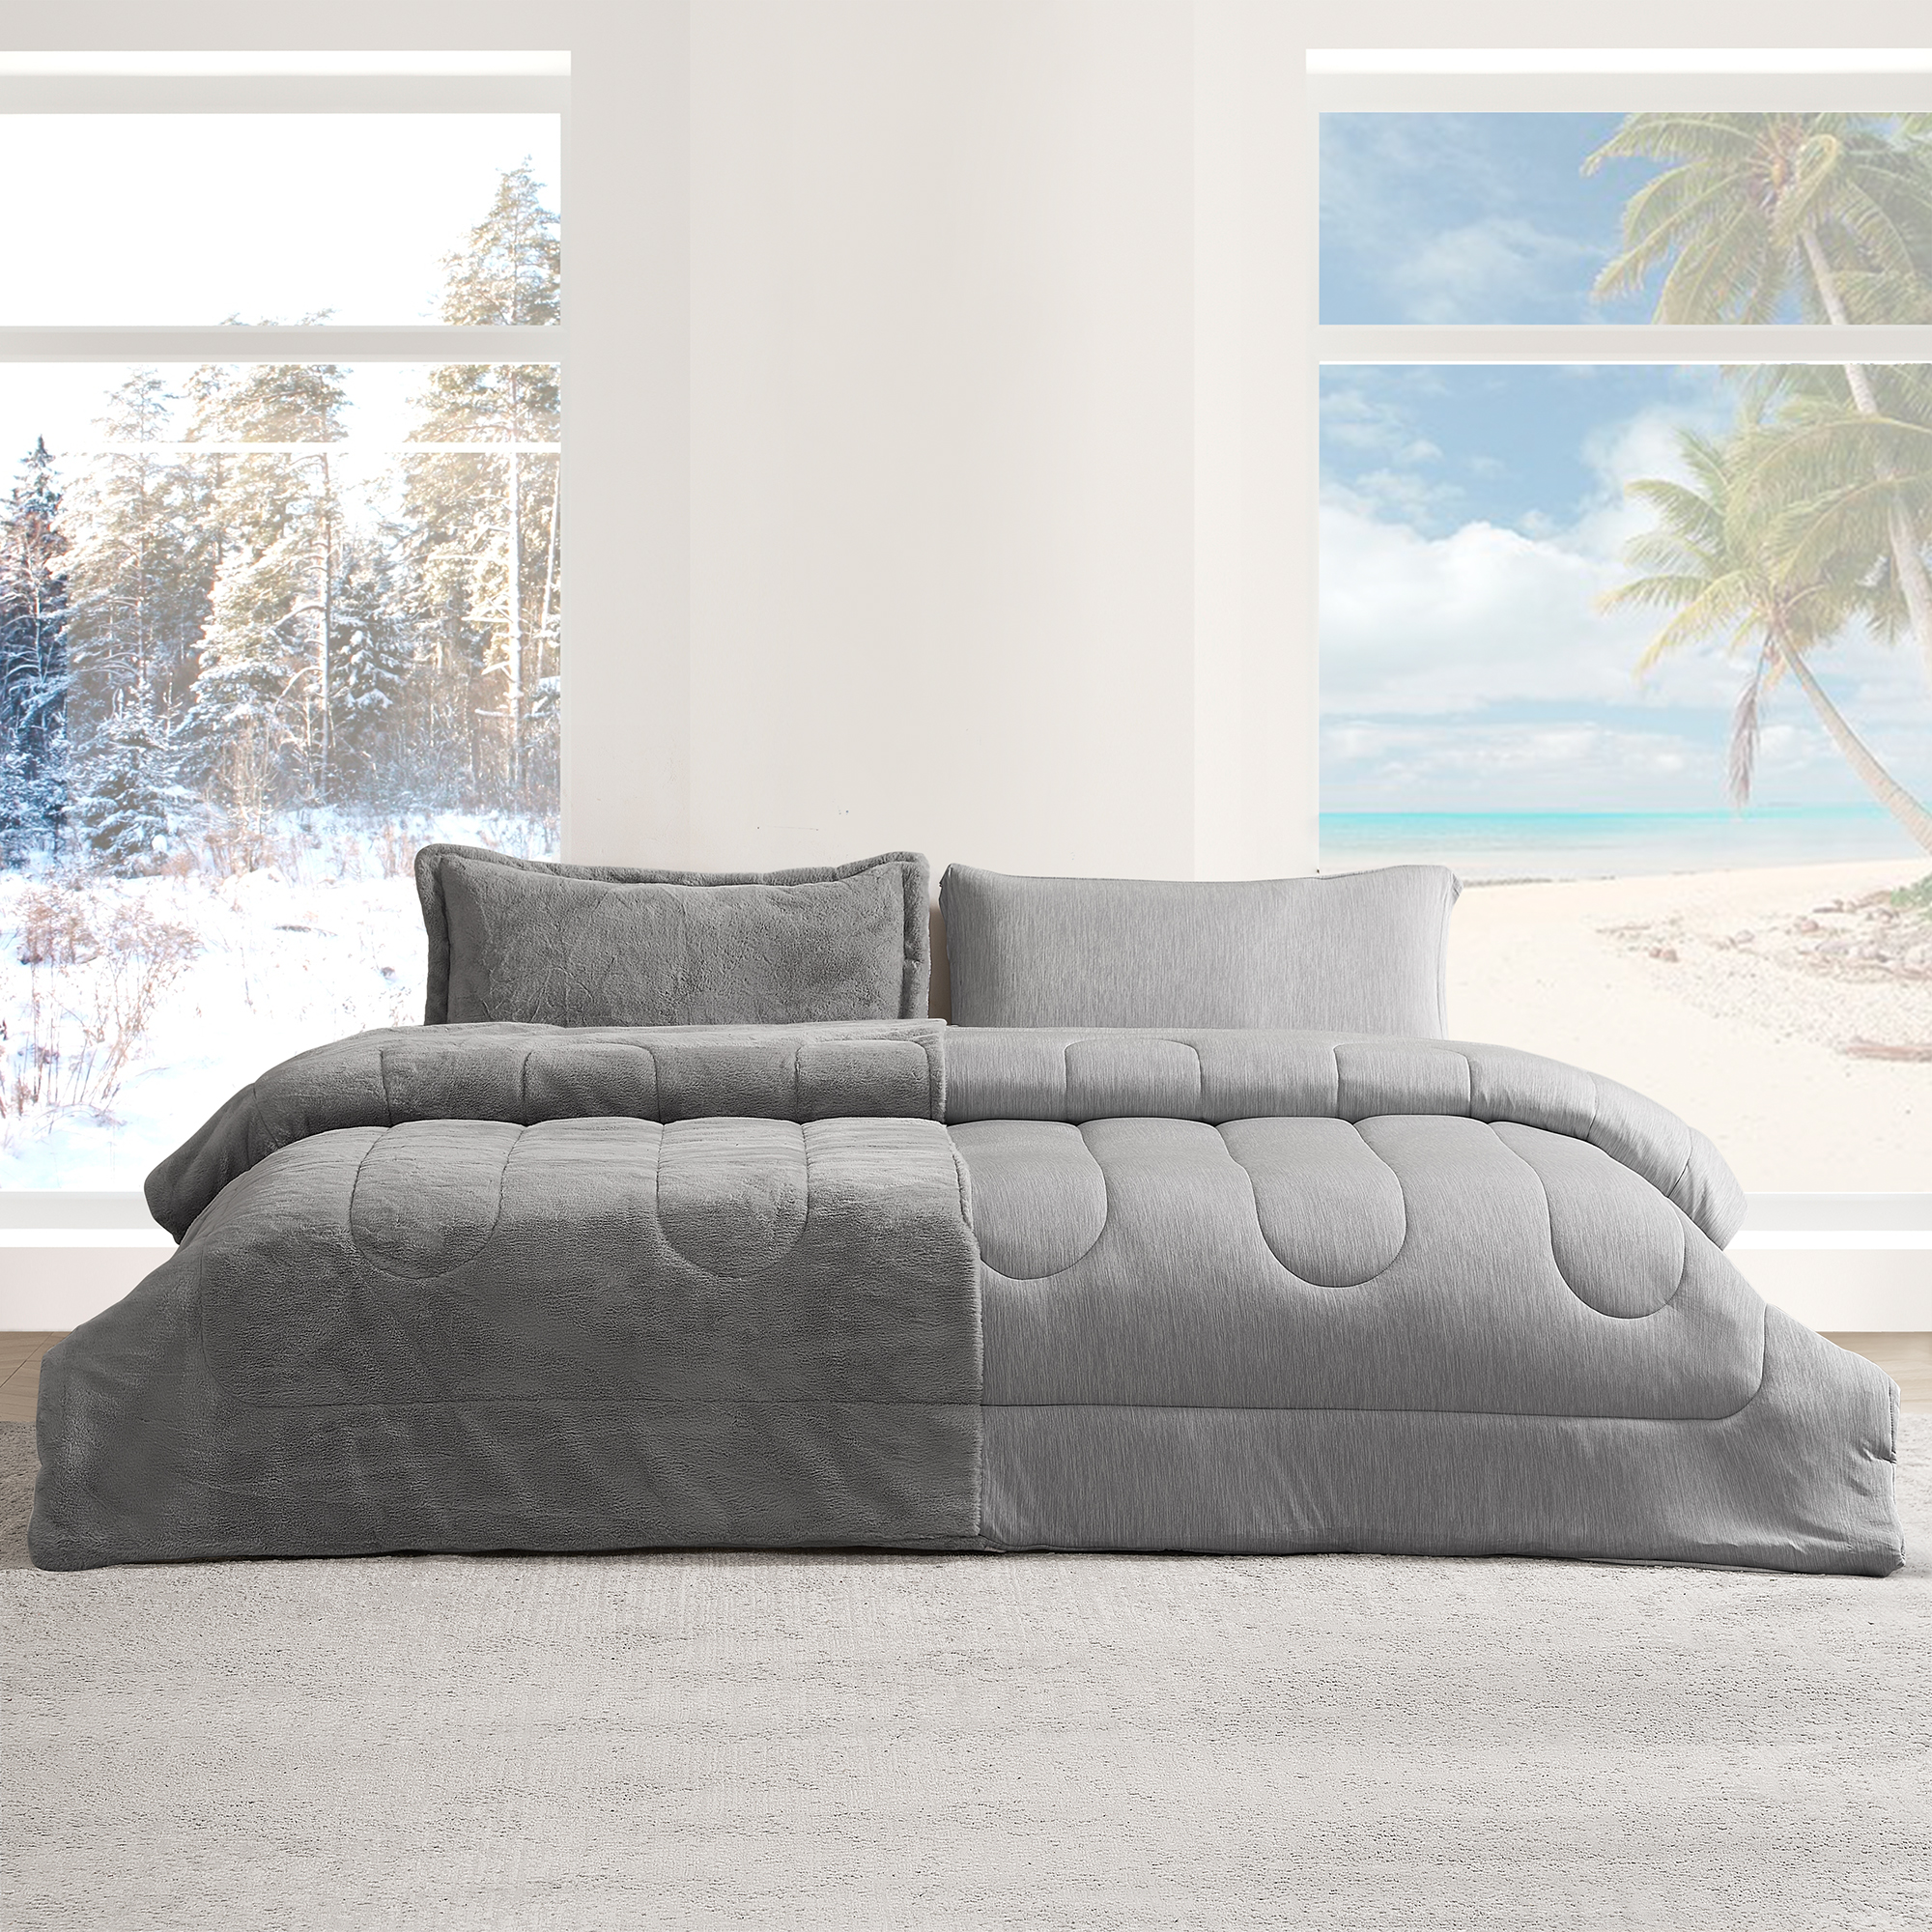 Opposites Attract - Coma Inducer Over Oversized King Comforter - Plush Chartreux Gray + Cooling Silver Gray